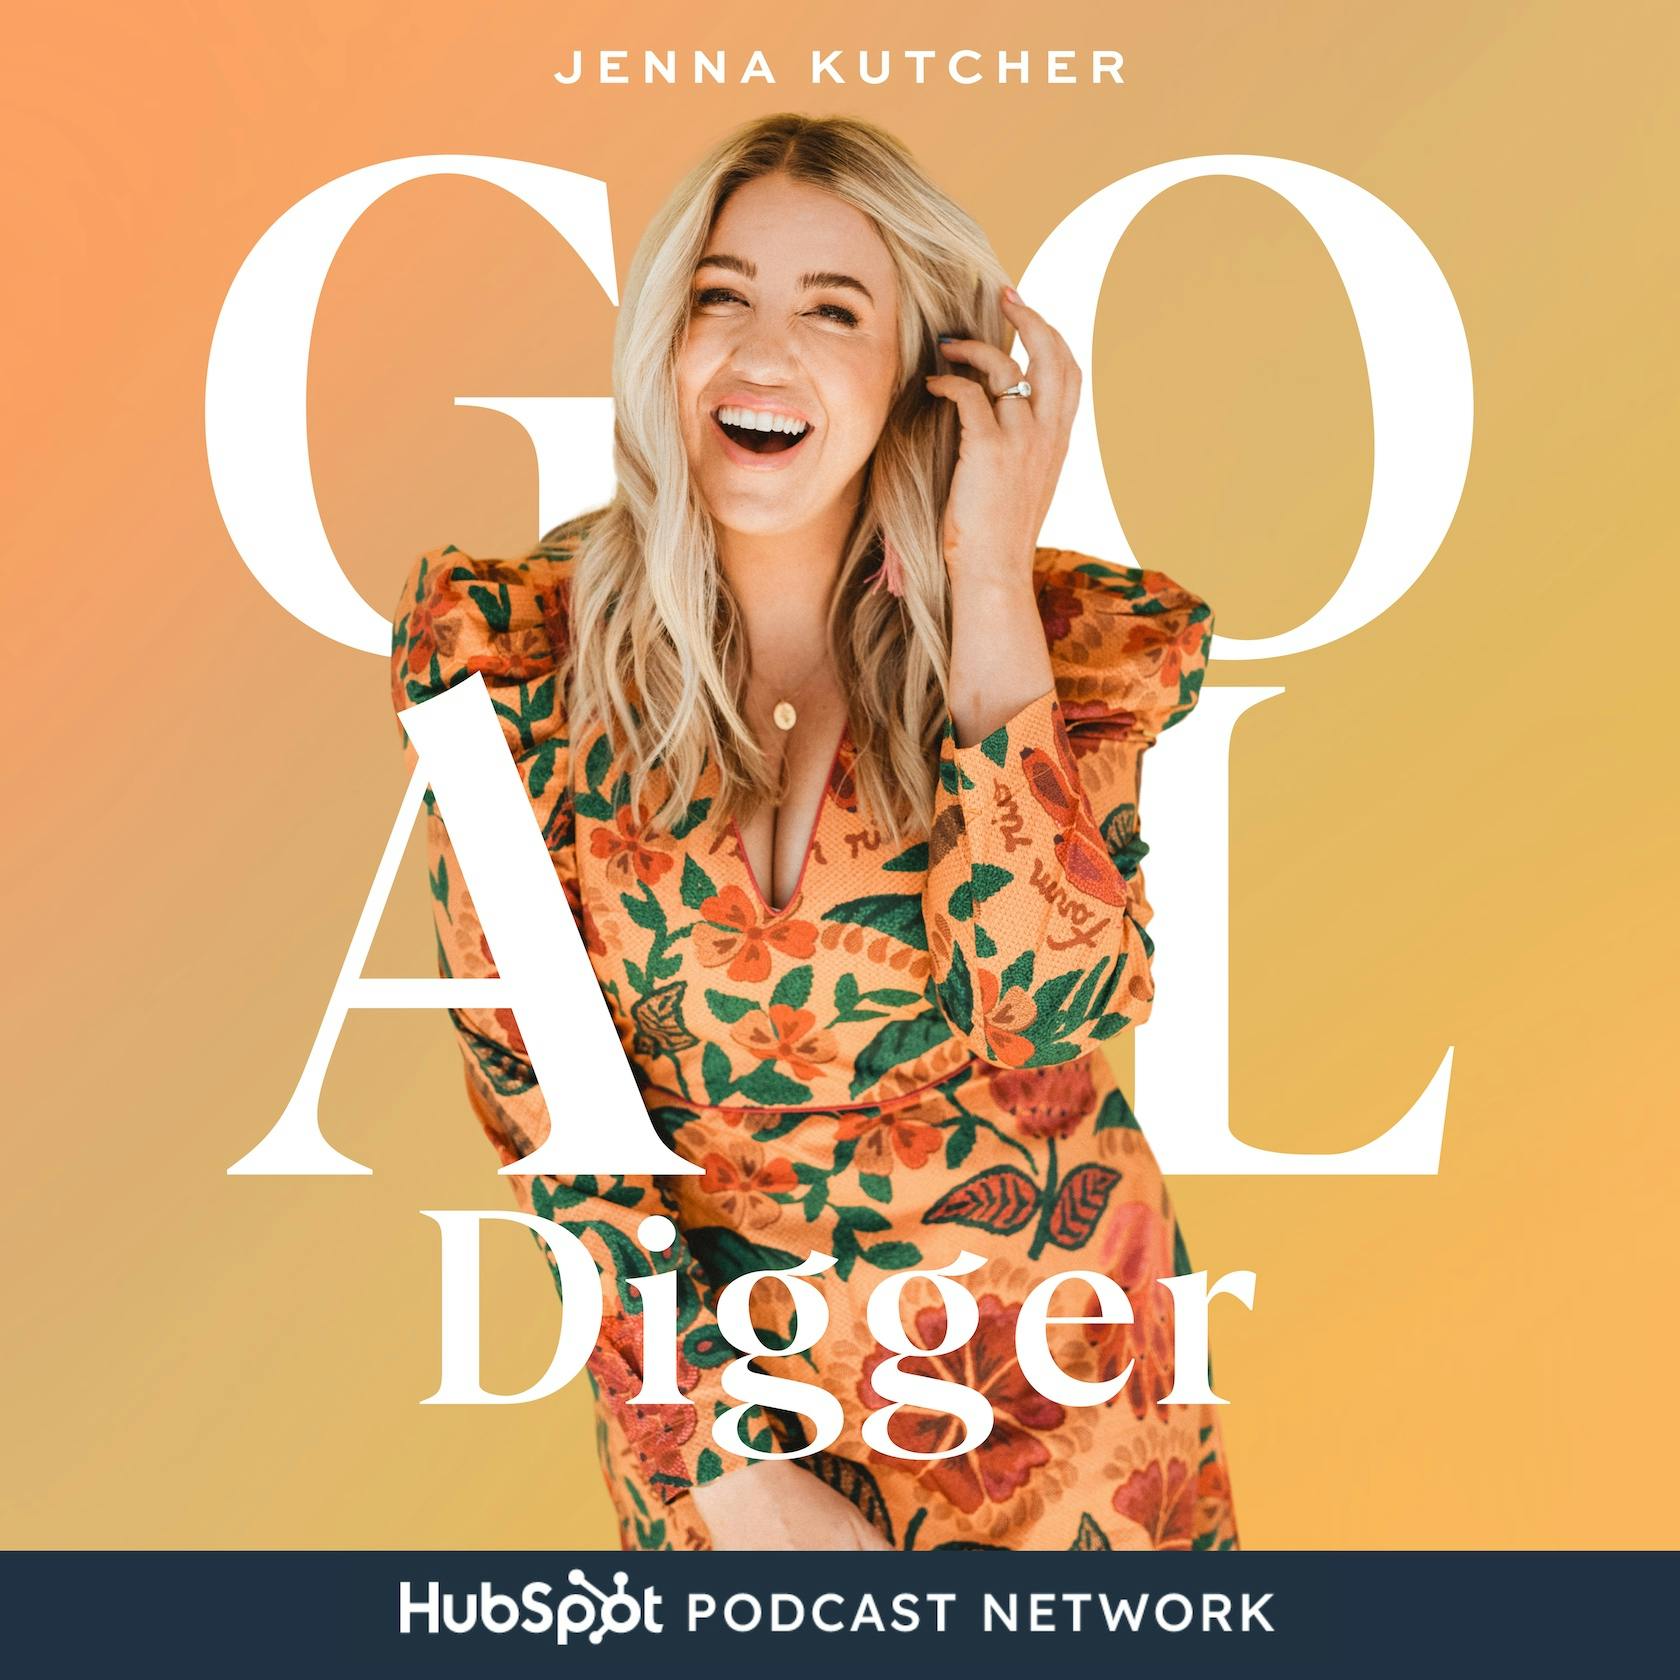 232: Without a College Degree, She Landed This Dream Job